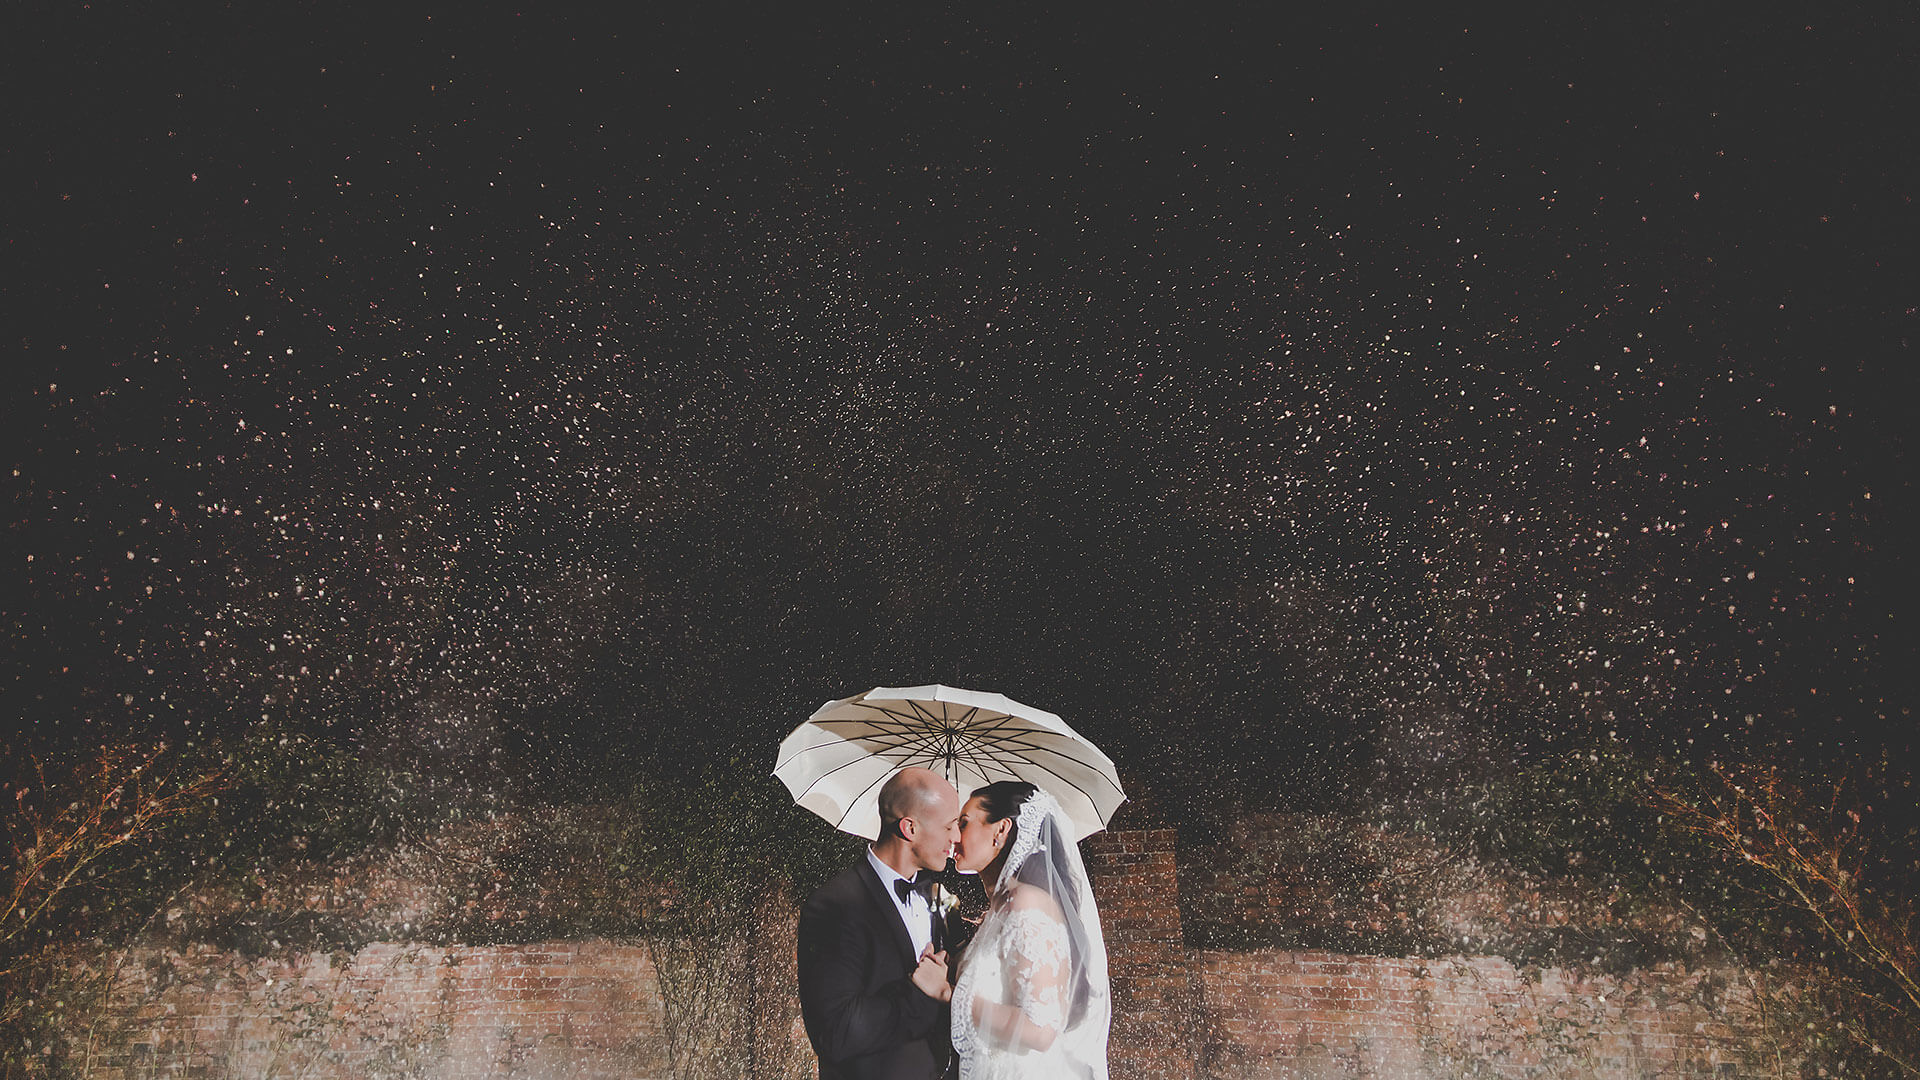 A couple kiss under falling snow at Gaynes Park winter wedding venue in Essex